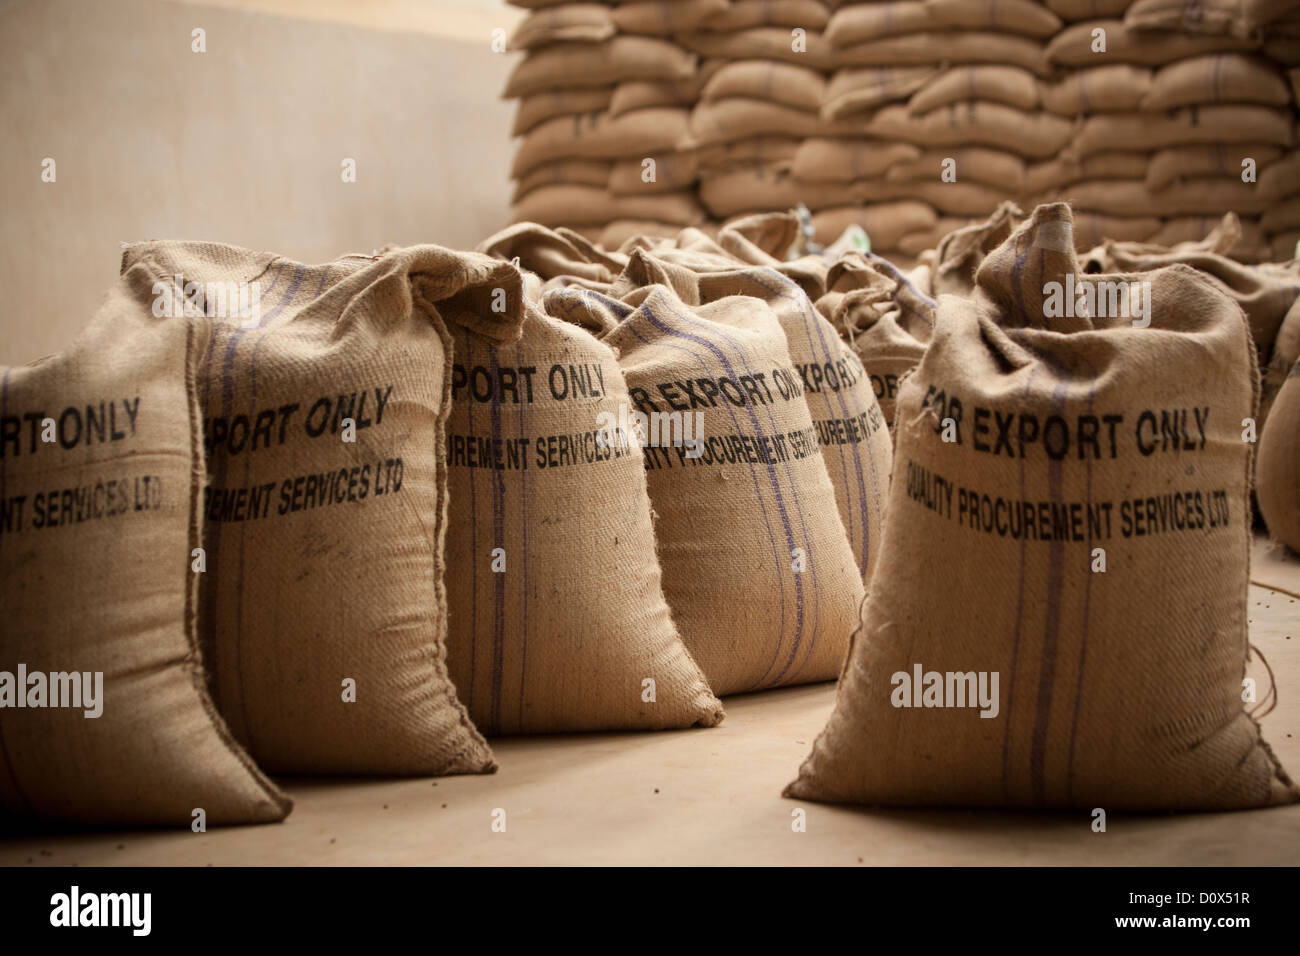 Bags of coffee beans are ready for export at a warehouse in Kampala, Uganda, East Africa. Stock Photo